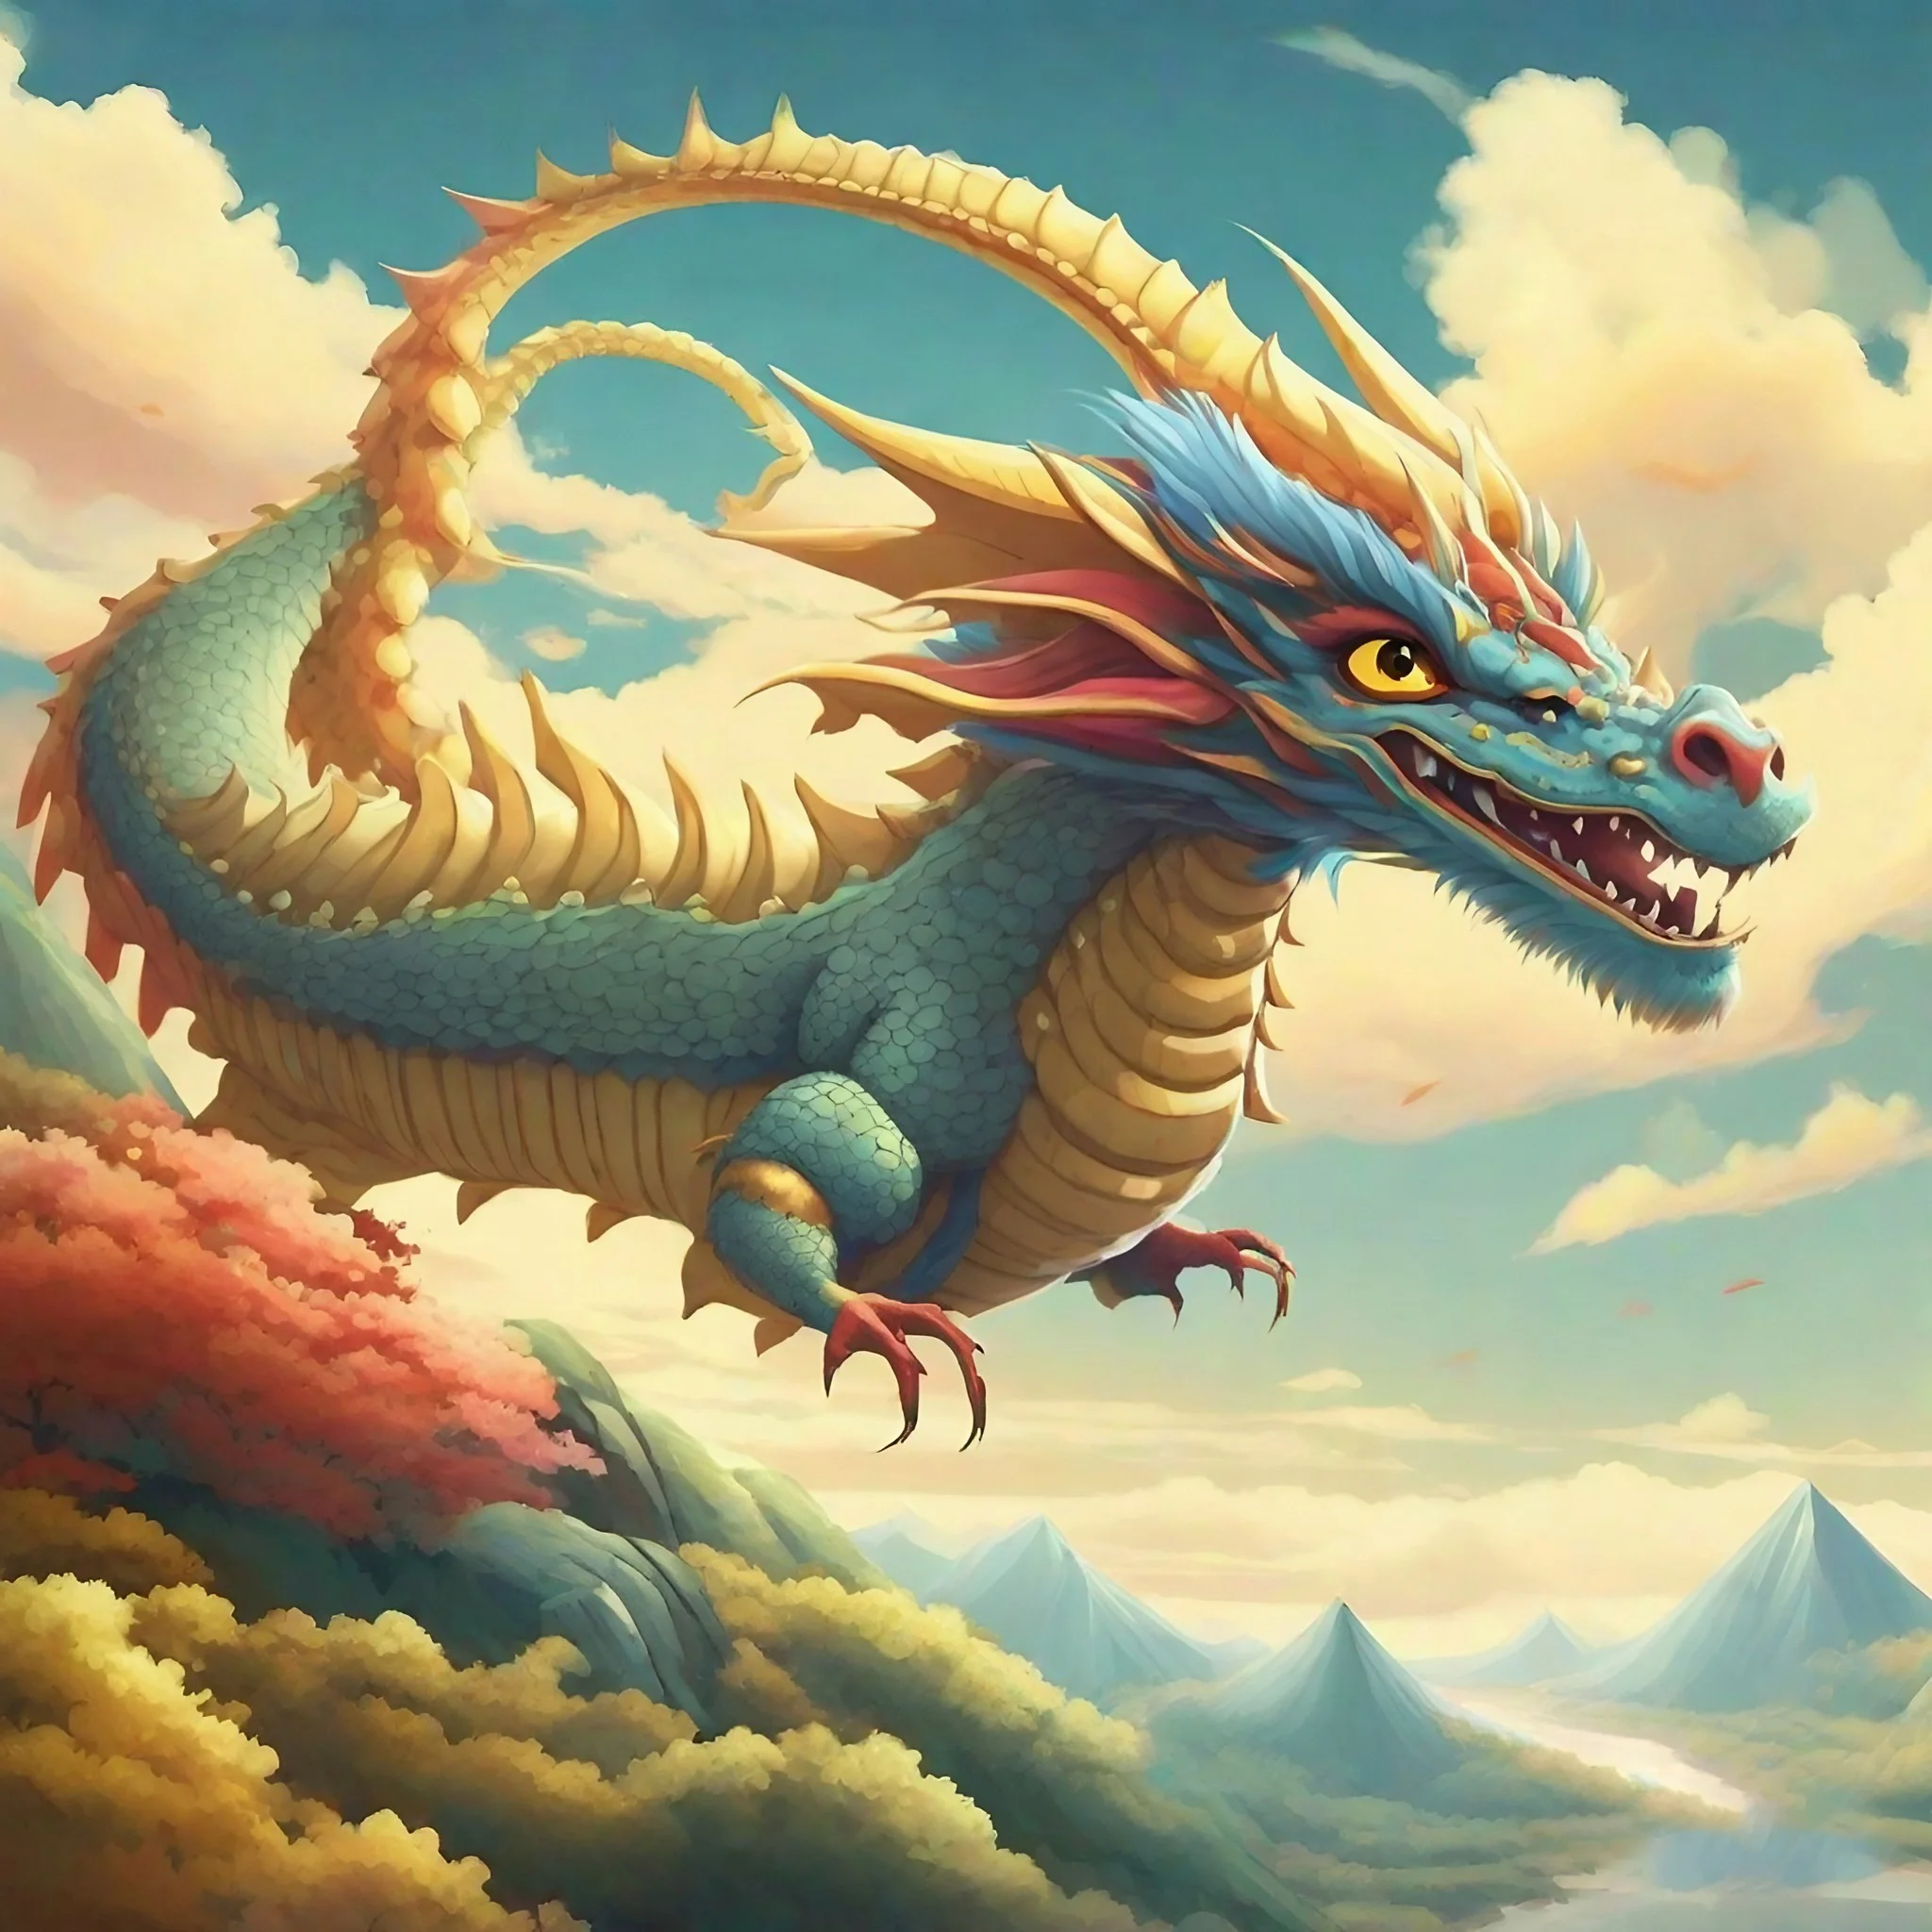 Colorful dragon flying in the sky, a symbol of strength, power, and good luck in Chinese culture